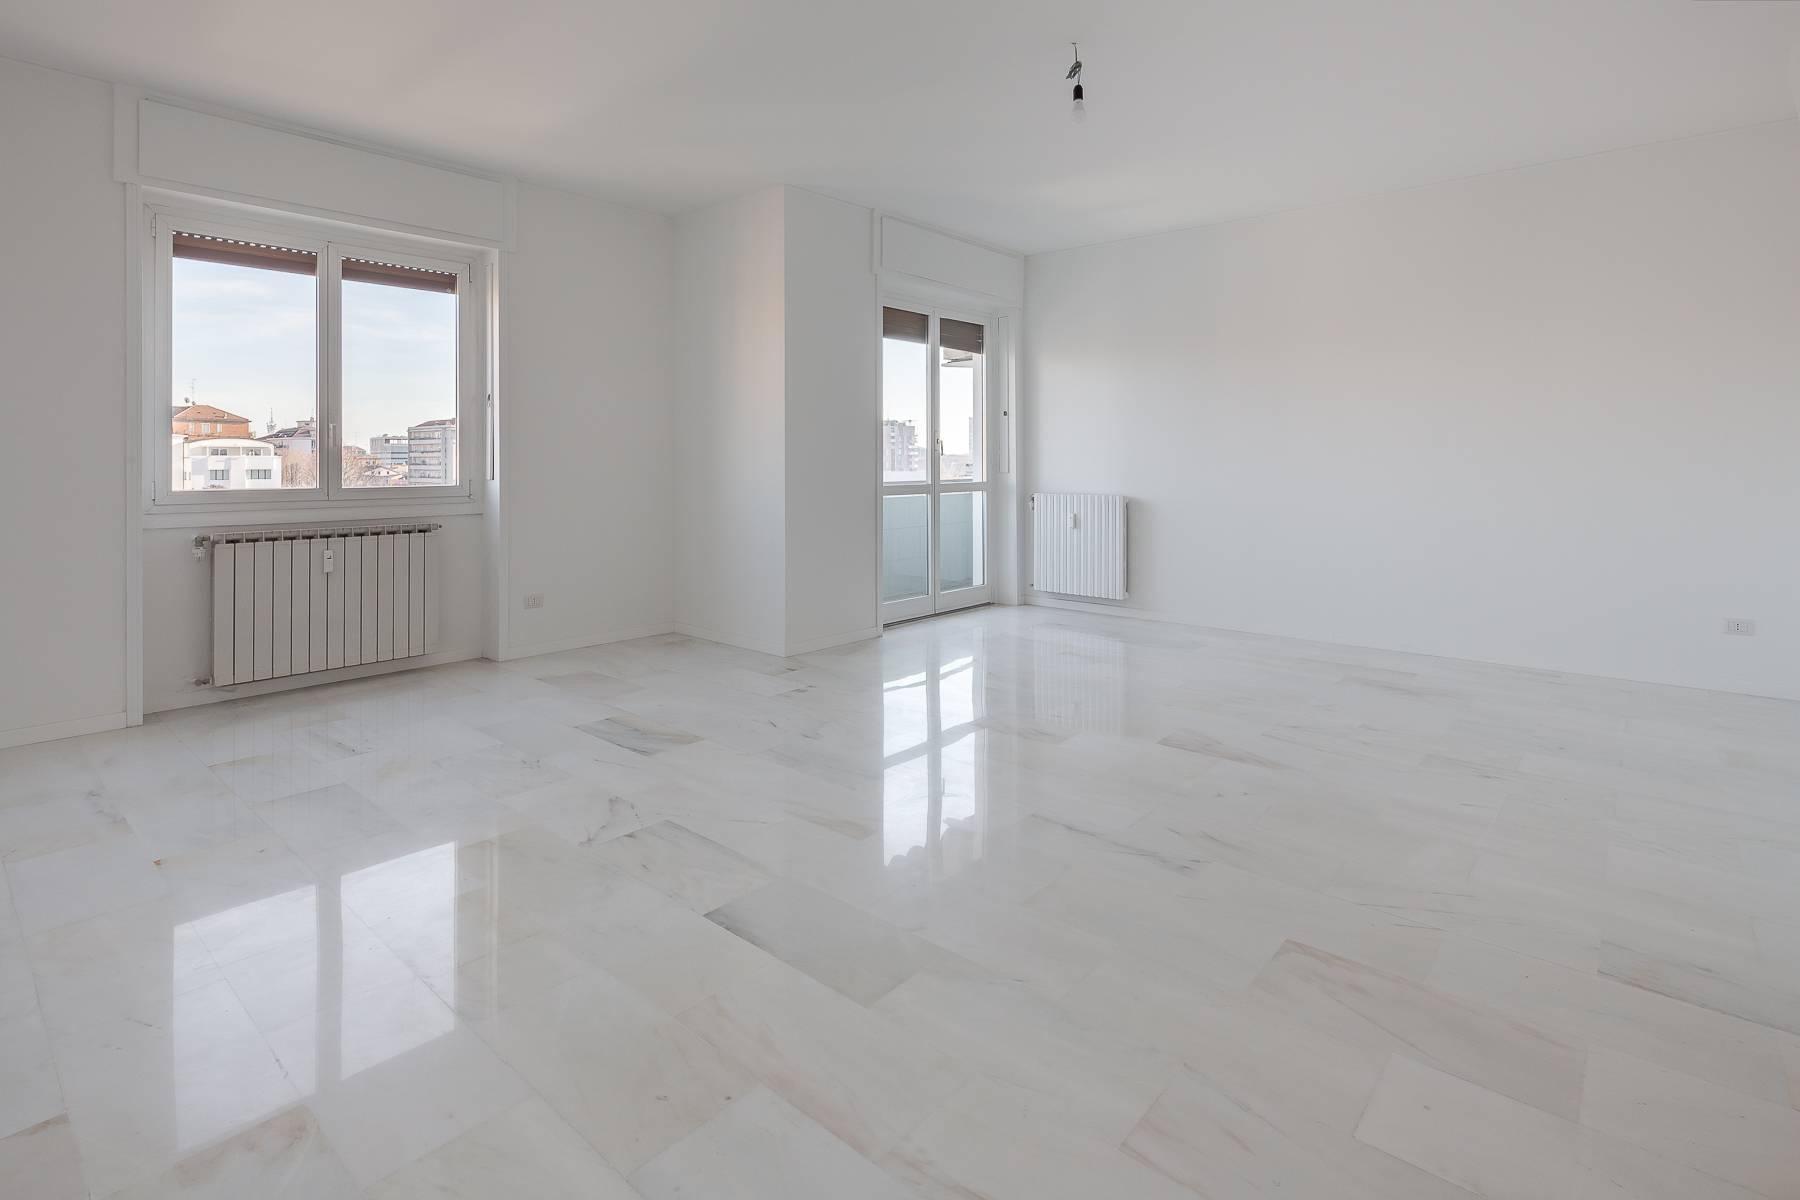 Large renovated apartment in Piazzale Accursio - 1